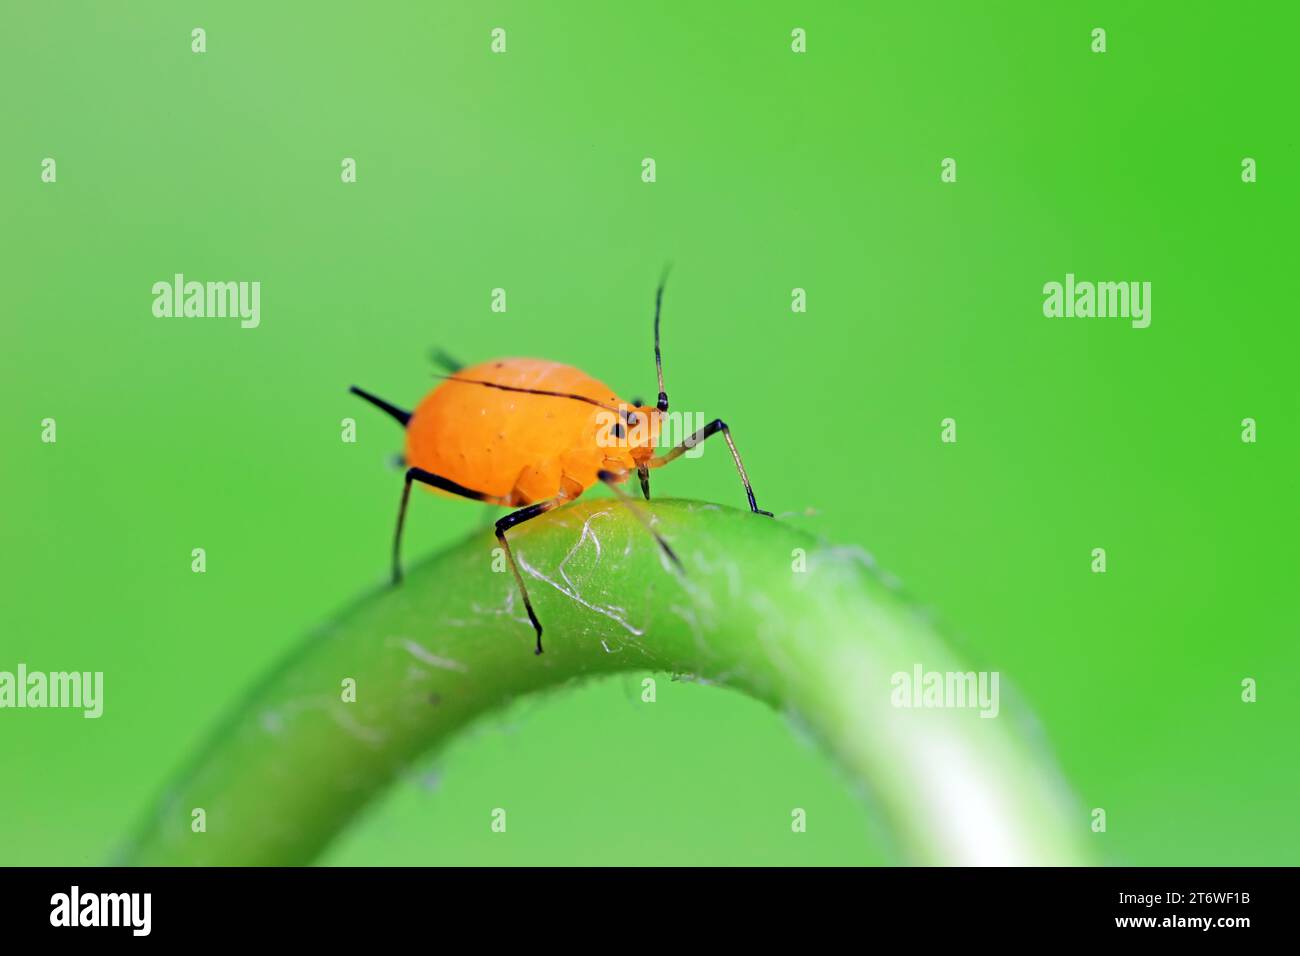 Aphids crawl on green plants Stock Photo